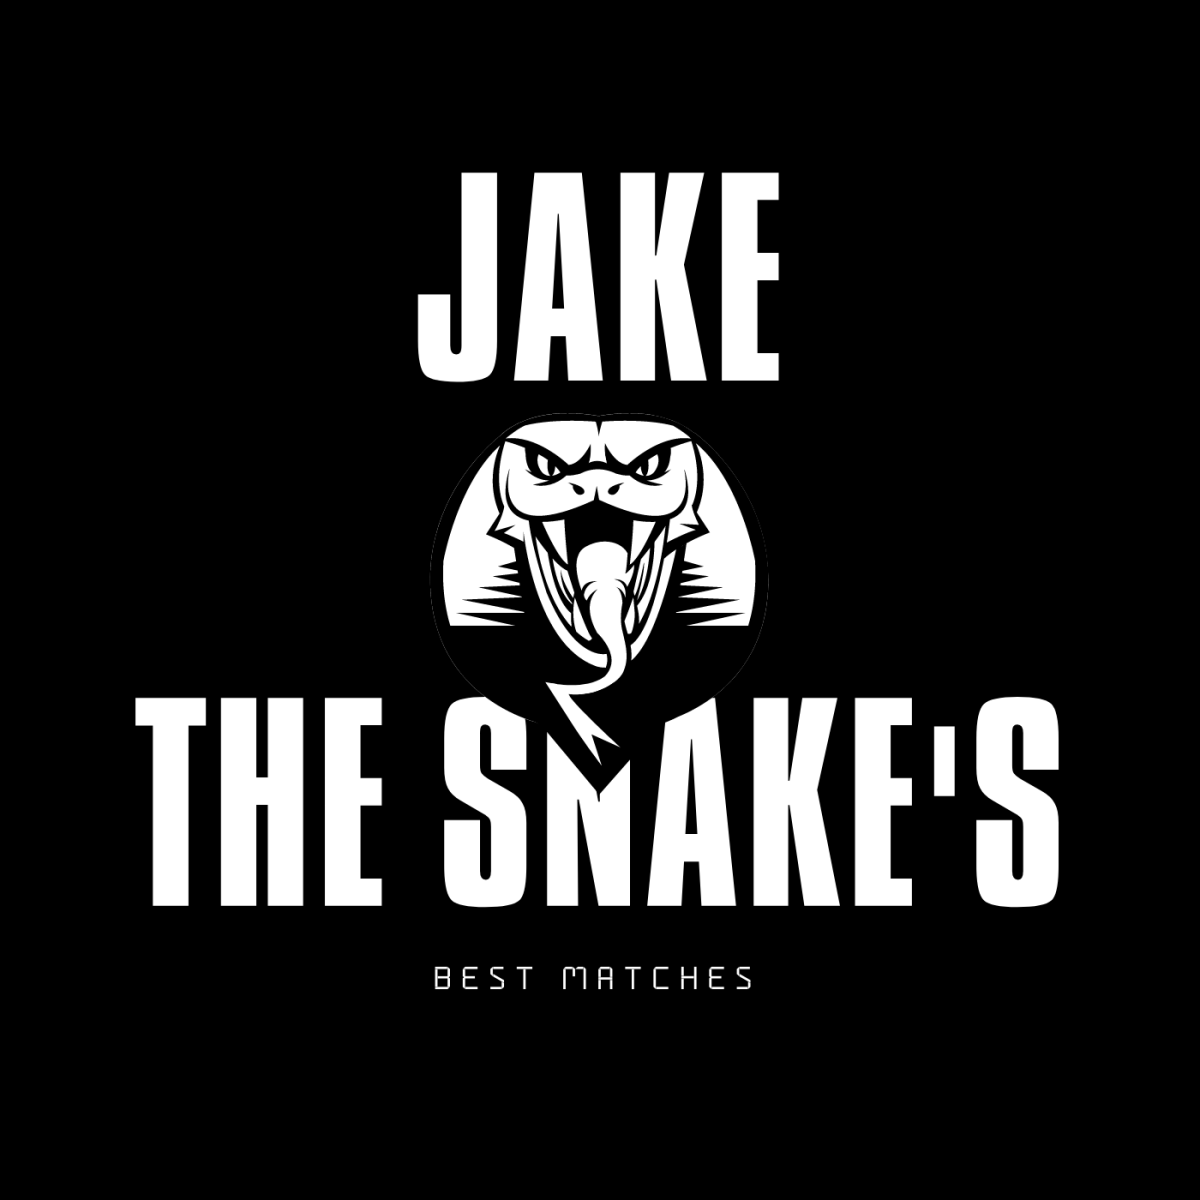 The man, the myth, the legend, Jake the Snake!